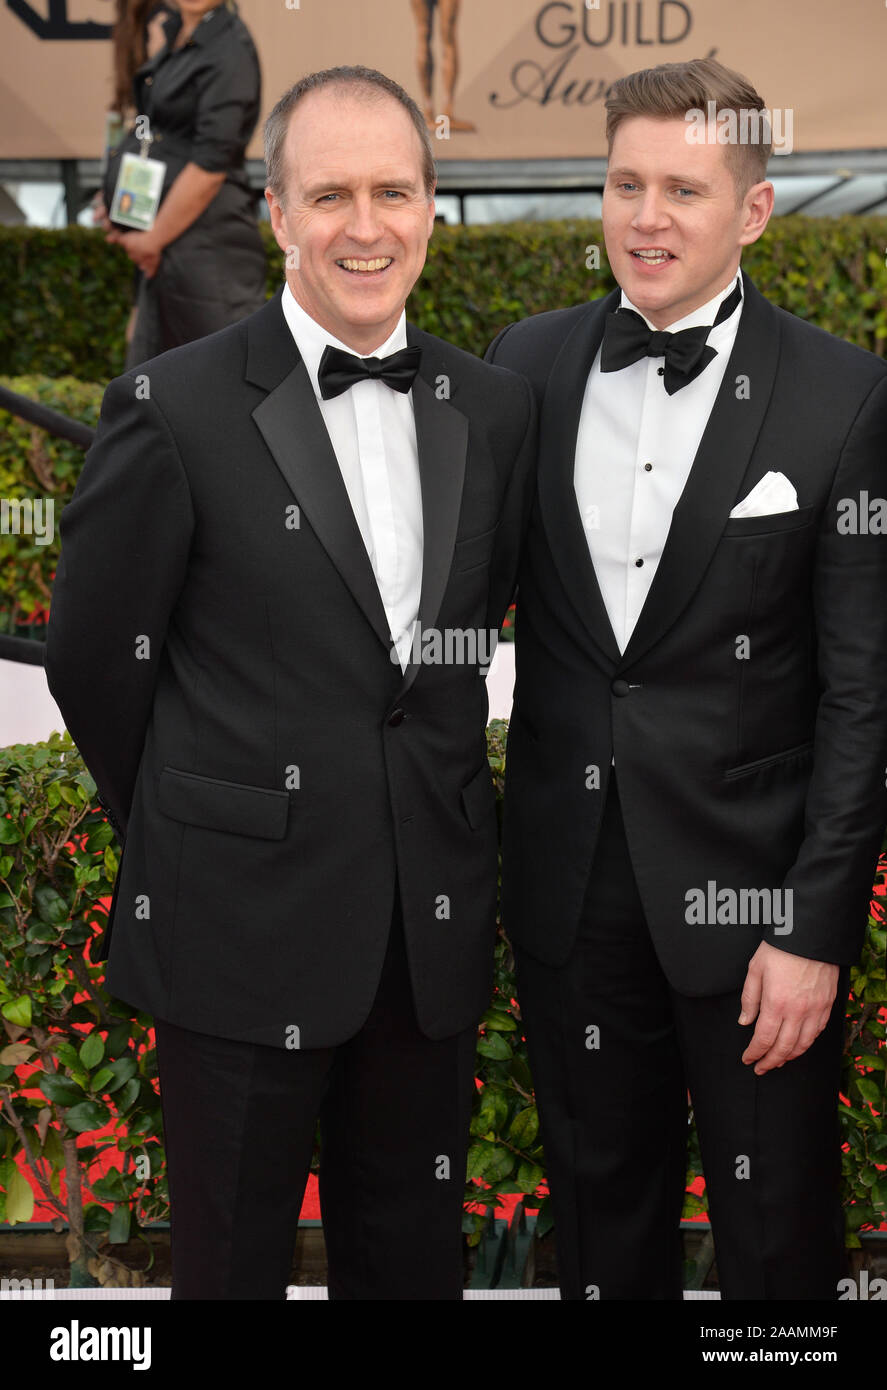 LOS ANGELES, CA - JANUARY 30, 2016: Actors Kevin Doyle & Allen Leech -  Downton Abbey - at the 22nd Annual Screen Actors Guild Awards at the Shrine  Auditorium © 2016 Paul Smith / Featureflash Stock Photo - Alamy